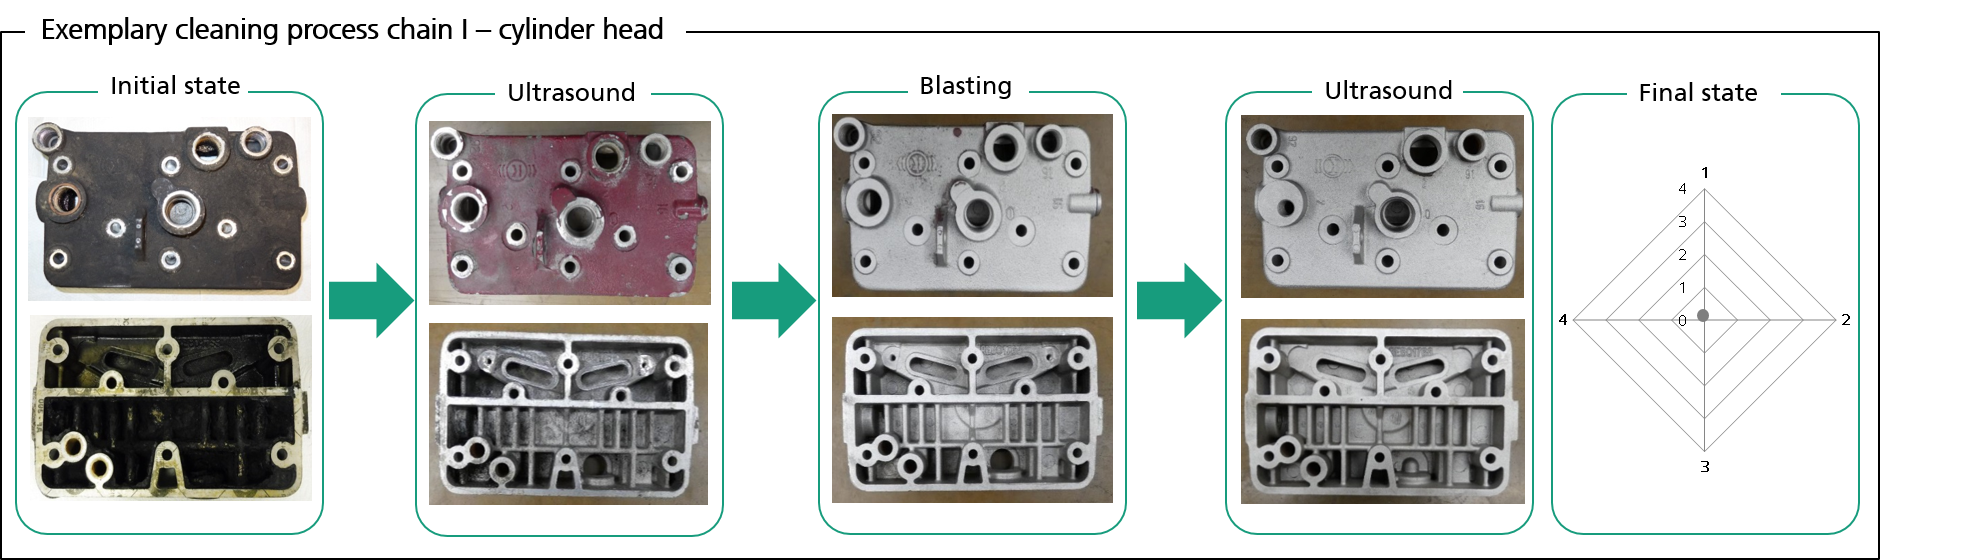 Exemplary cleaning process chain: cylinder head